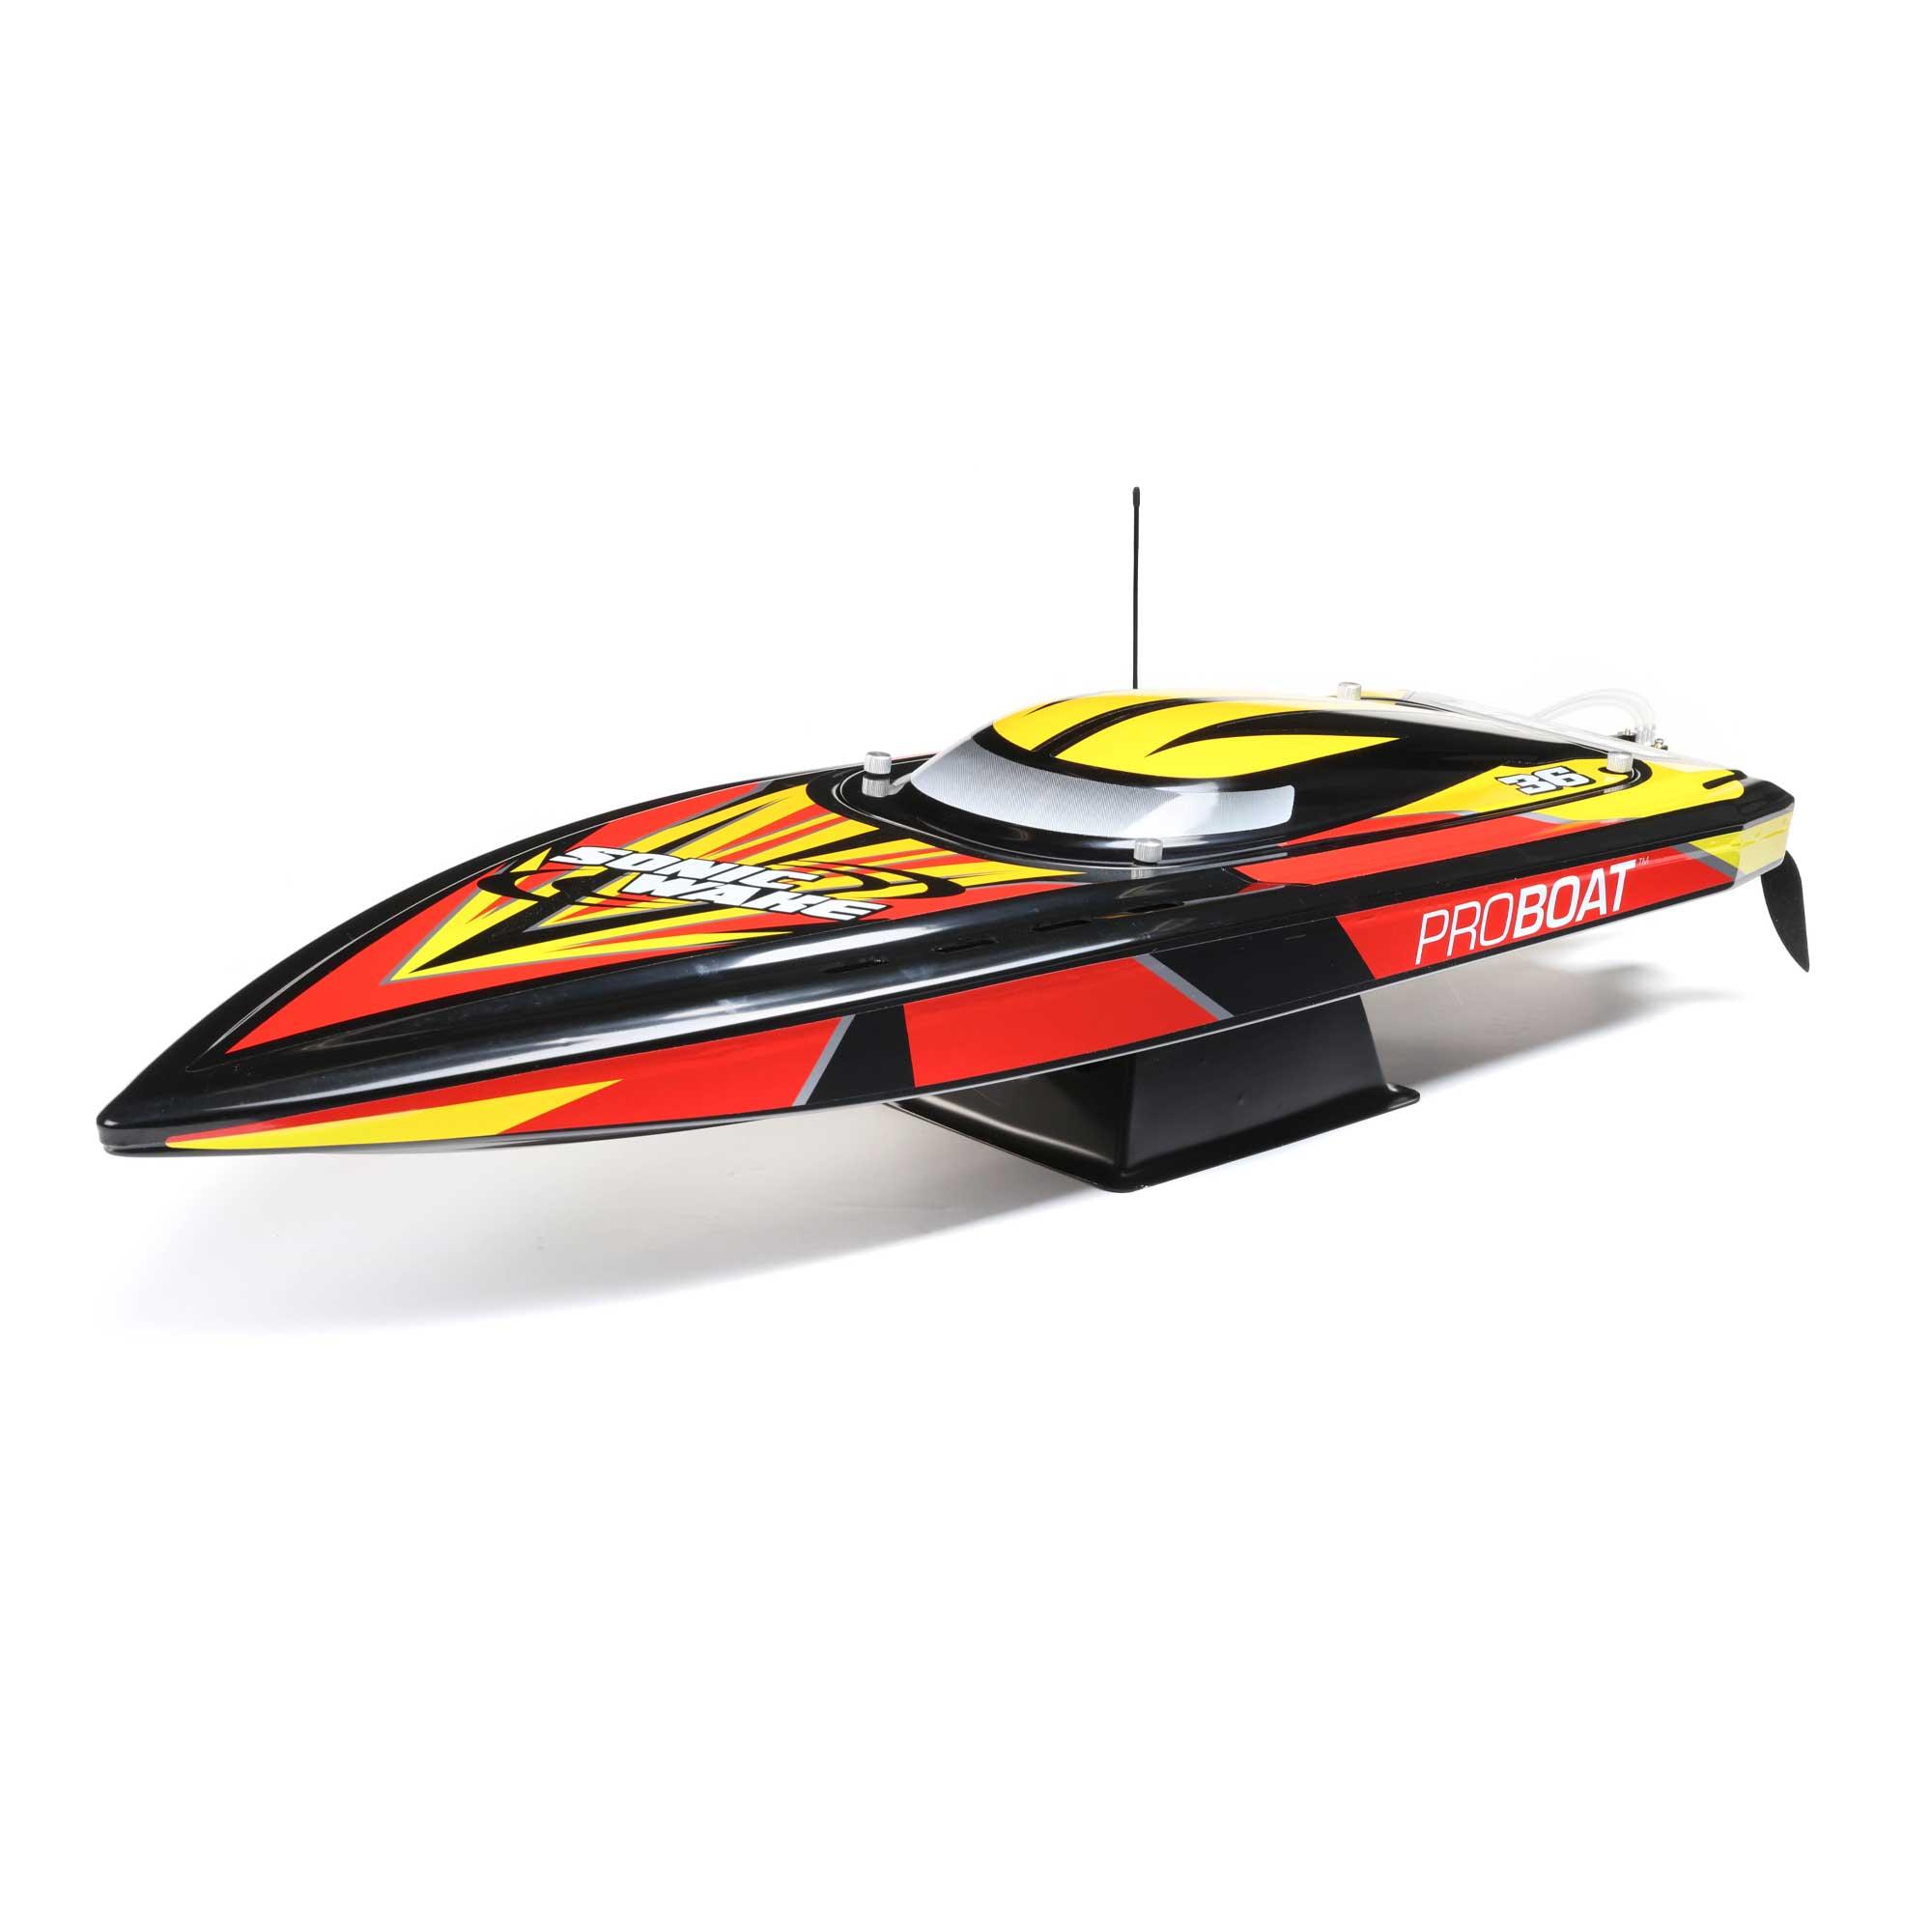 Proboat Gas Rc Boat: The Features and Specifications of the Proboat Gas RC Boat